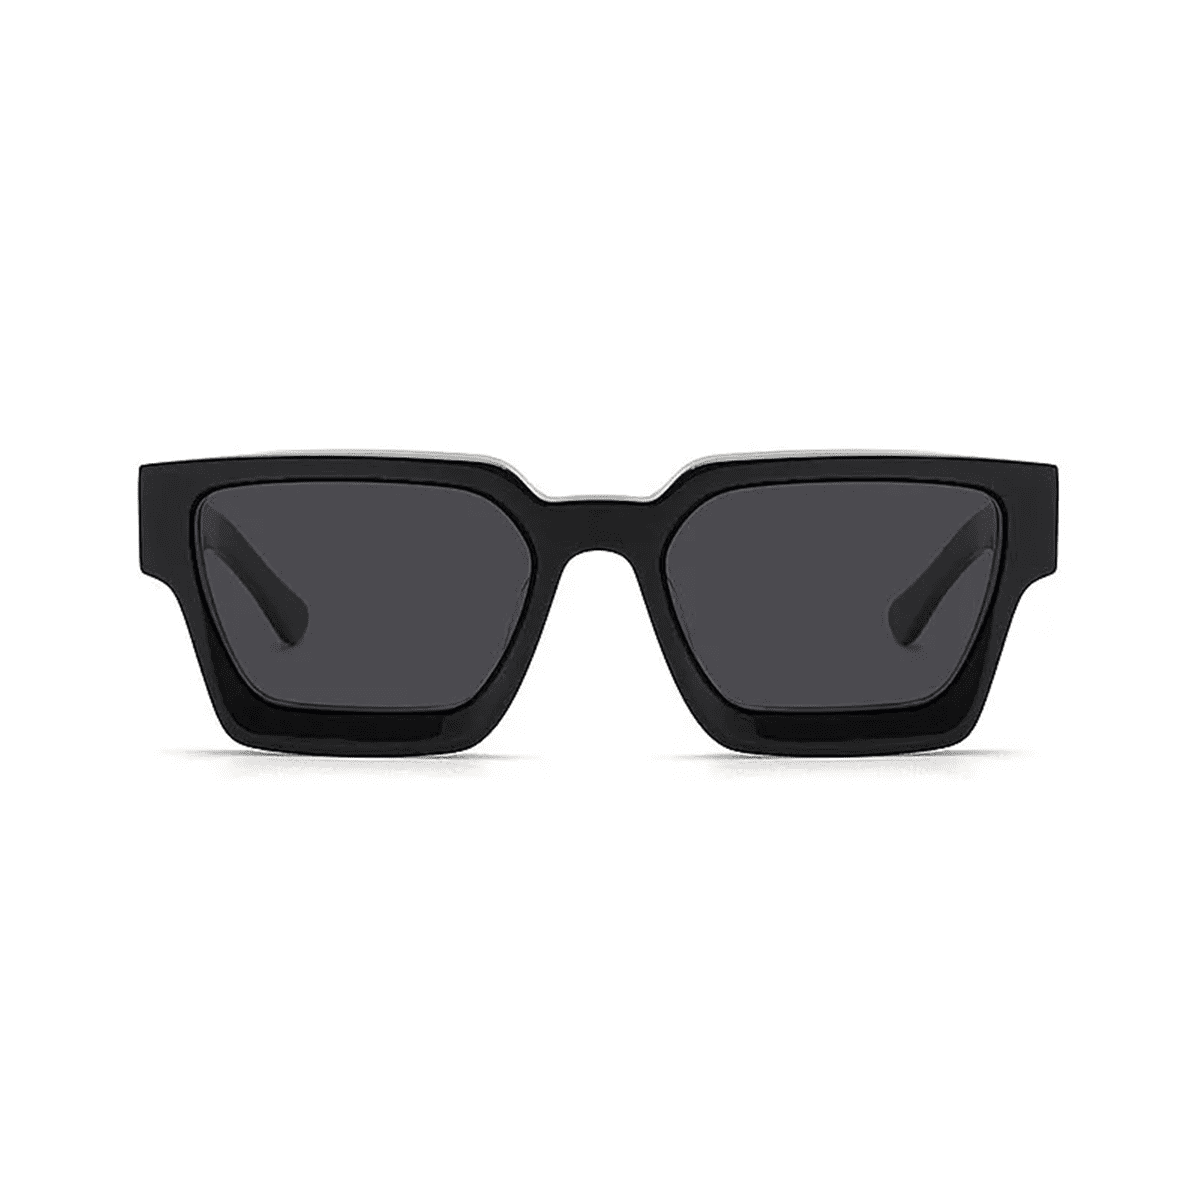 Rebel, luxurious square sunglasses by AKA SAVRAN, inspired by Virgil Abloh and made out of acetate